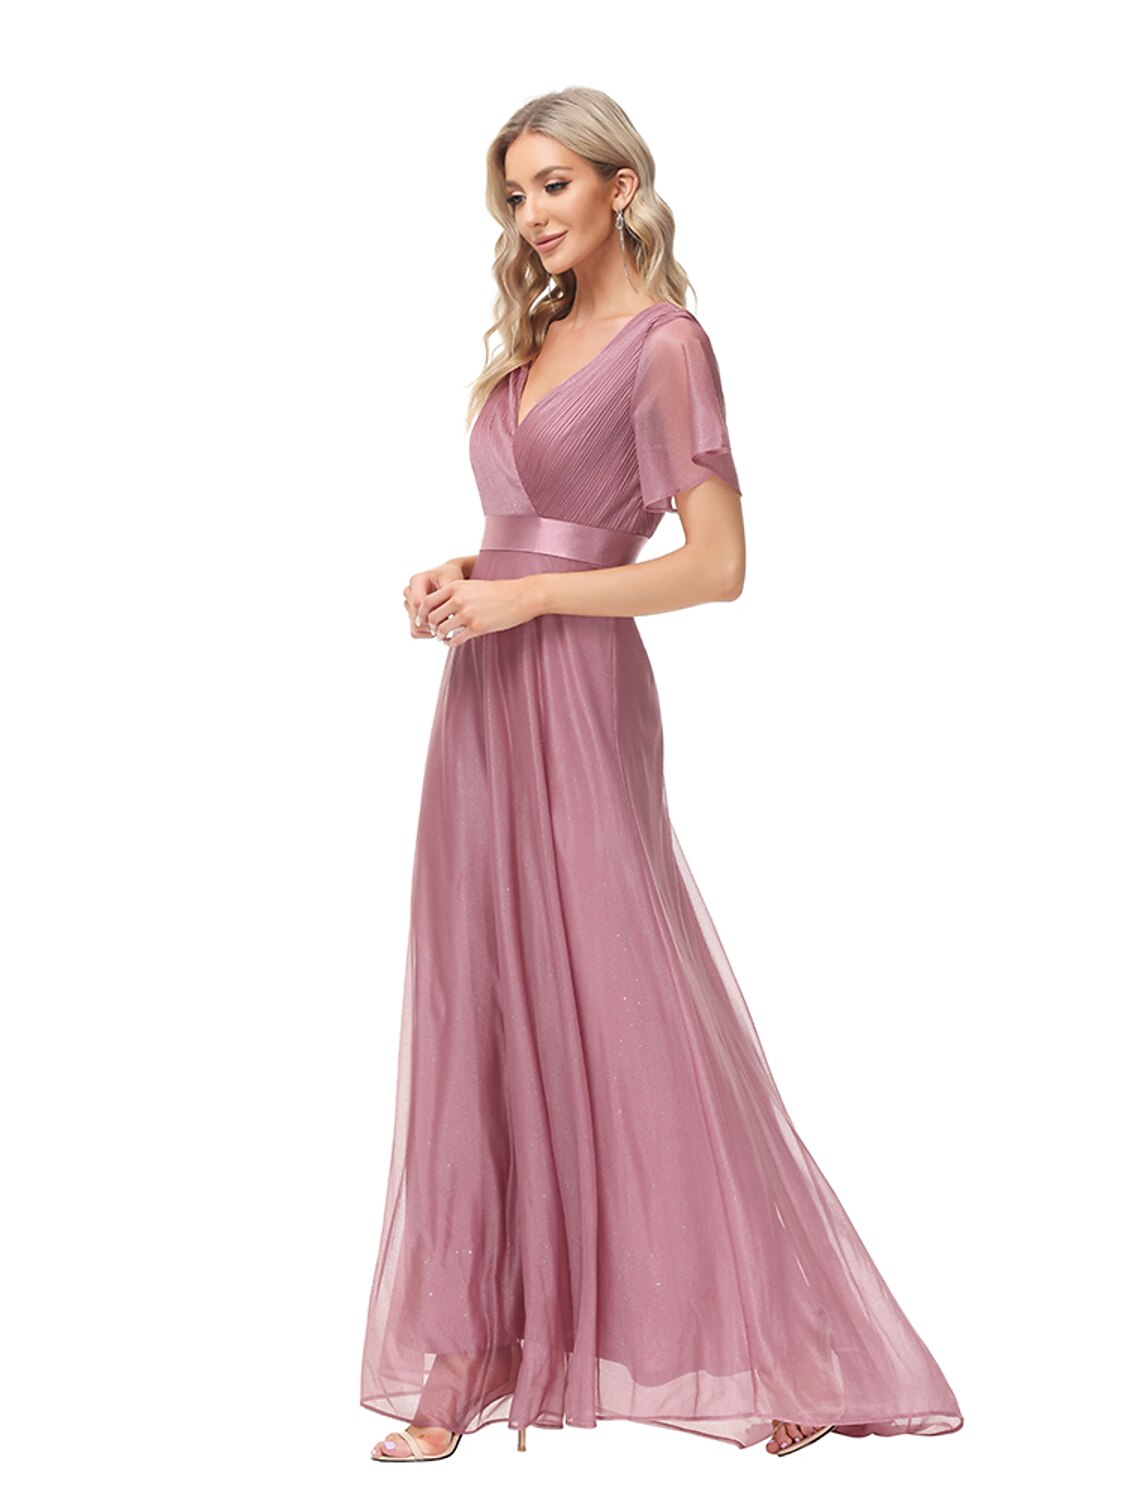 A-Line Evening Gown Party Dress Empire Dress Wedding Guest Prom Floor Length Short Sleeve V Neck Bridesmaid Dress Tulle with Ruched Ruffles